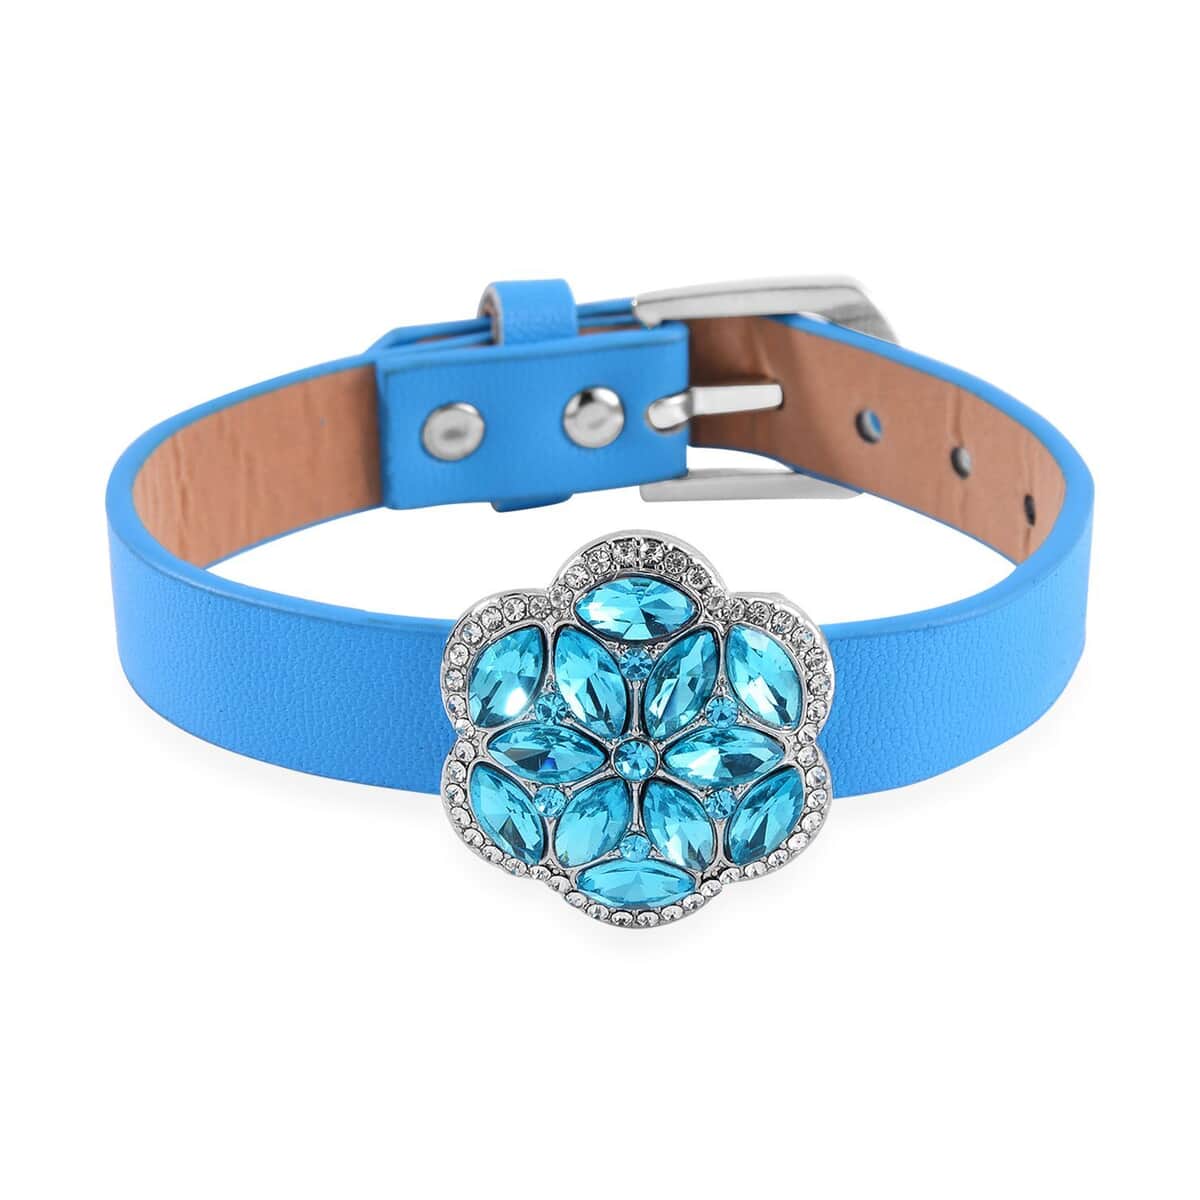 Sky Blue Color and White Austrian Crystal, Faux Leather Floral Bracelet (6-8In), Earrings, Ring (Size 6.0) and Pendant Necklace 20-22 Inches In Silvertone image number 3